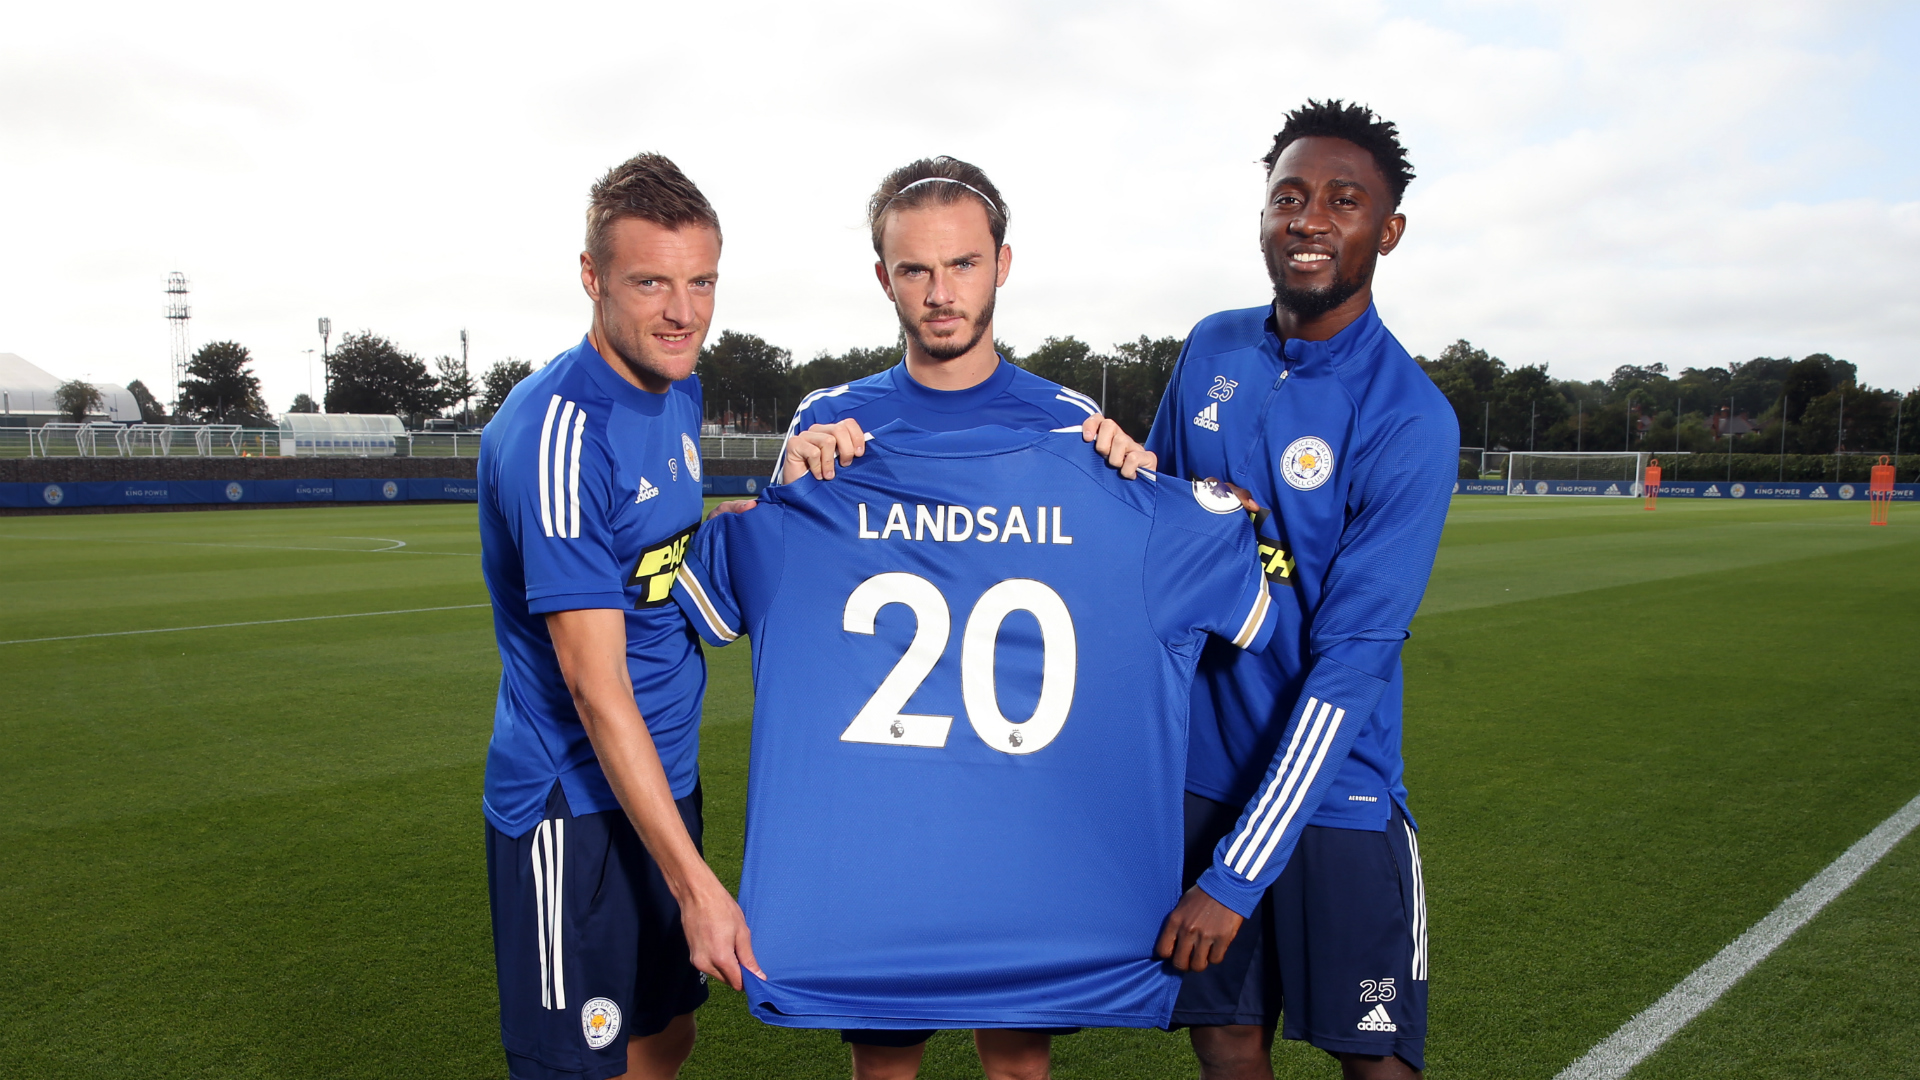 Landsail named official tyre partner of Leicester City